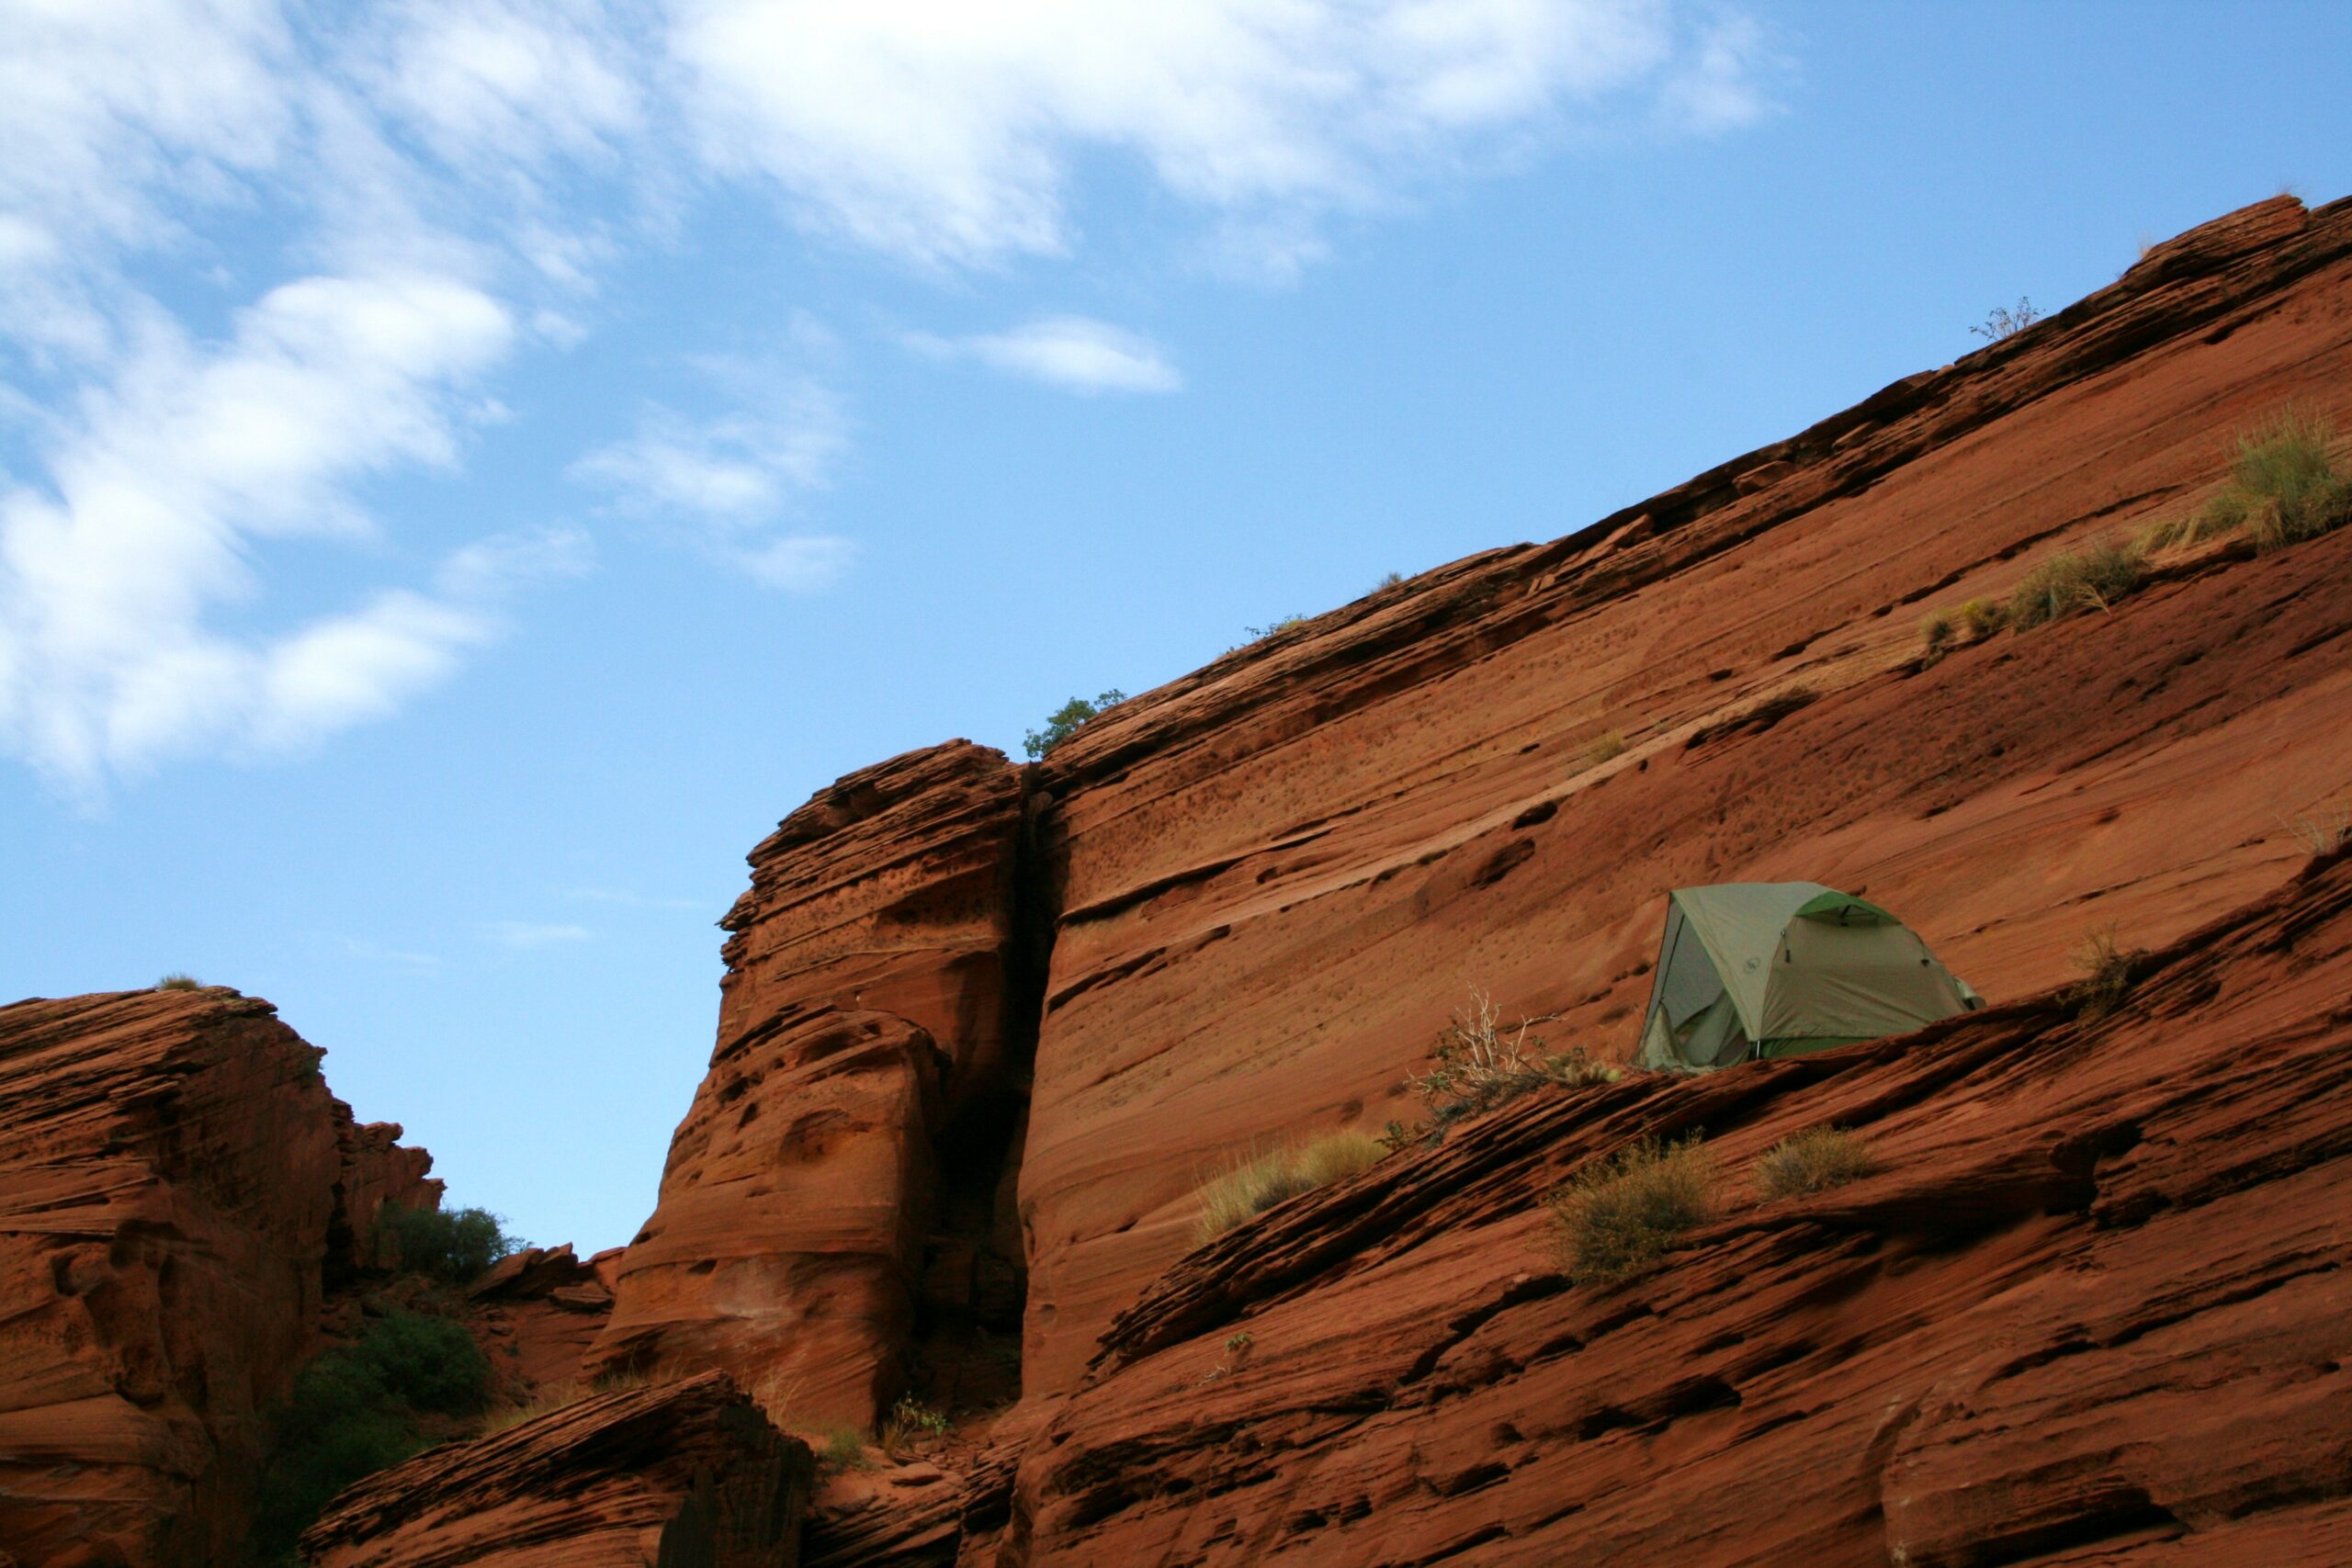 A tent sits high on a ledge near the Middle Route, in a place we named The Penthouse.